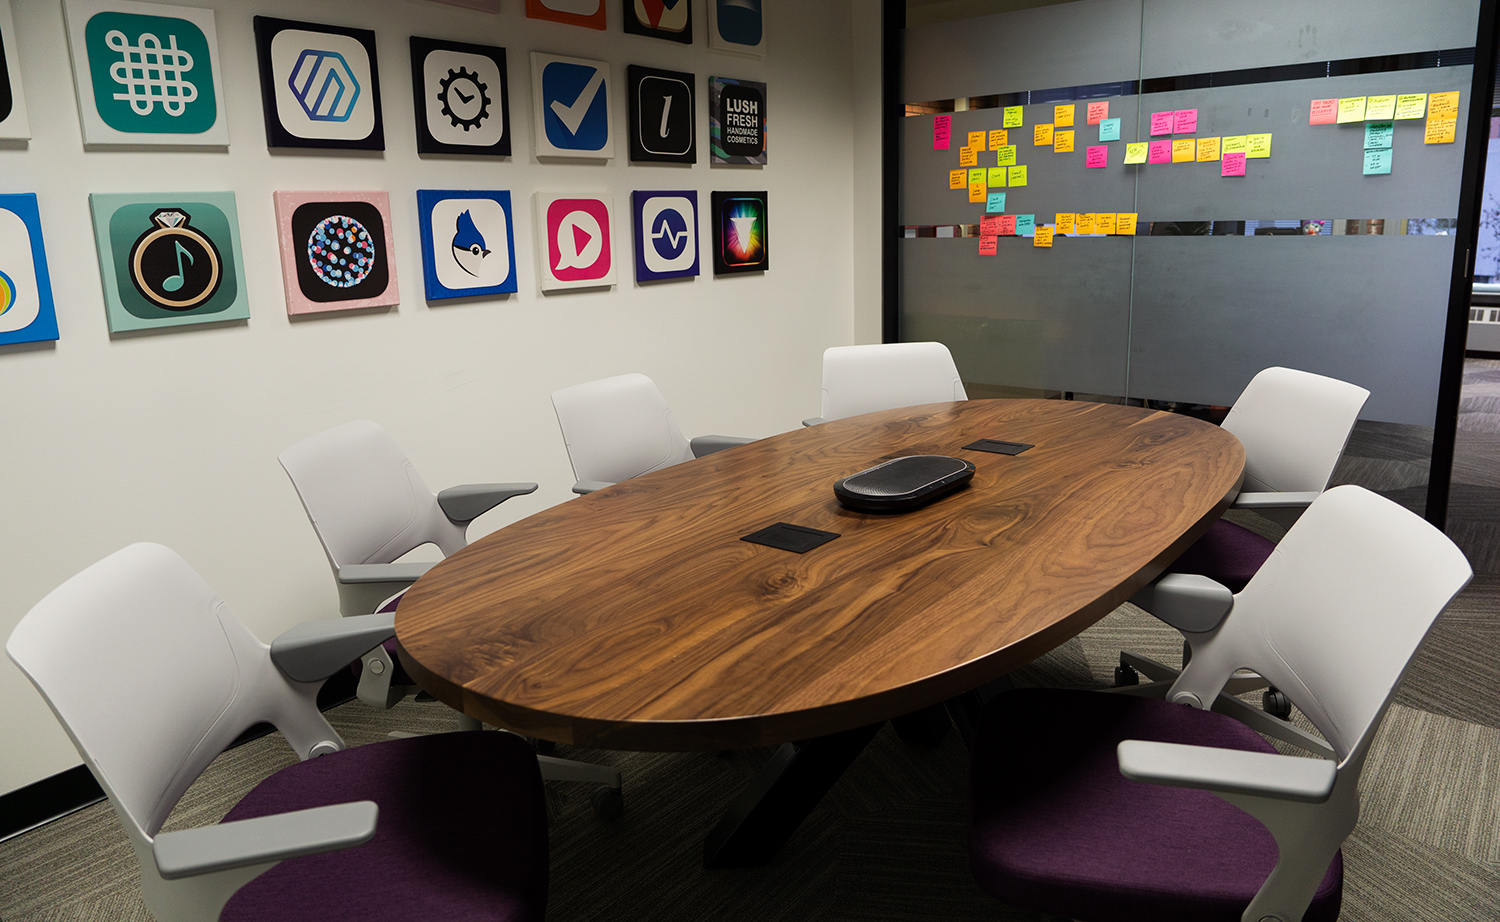 Our empty meeting room at the Steamclock office with our built app's icons on the wall and colorful stickynotes by the door